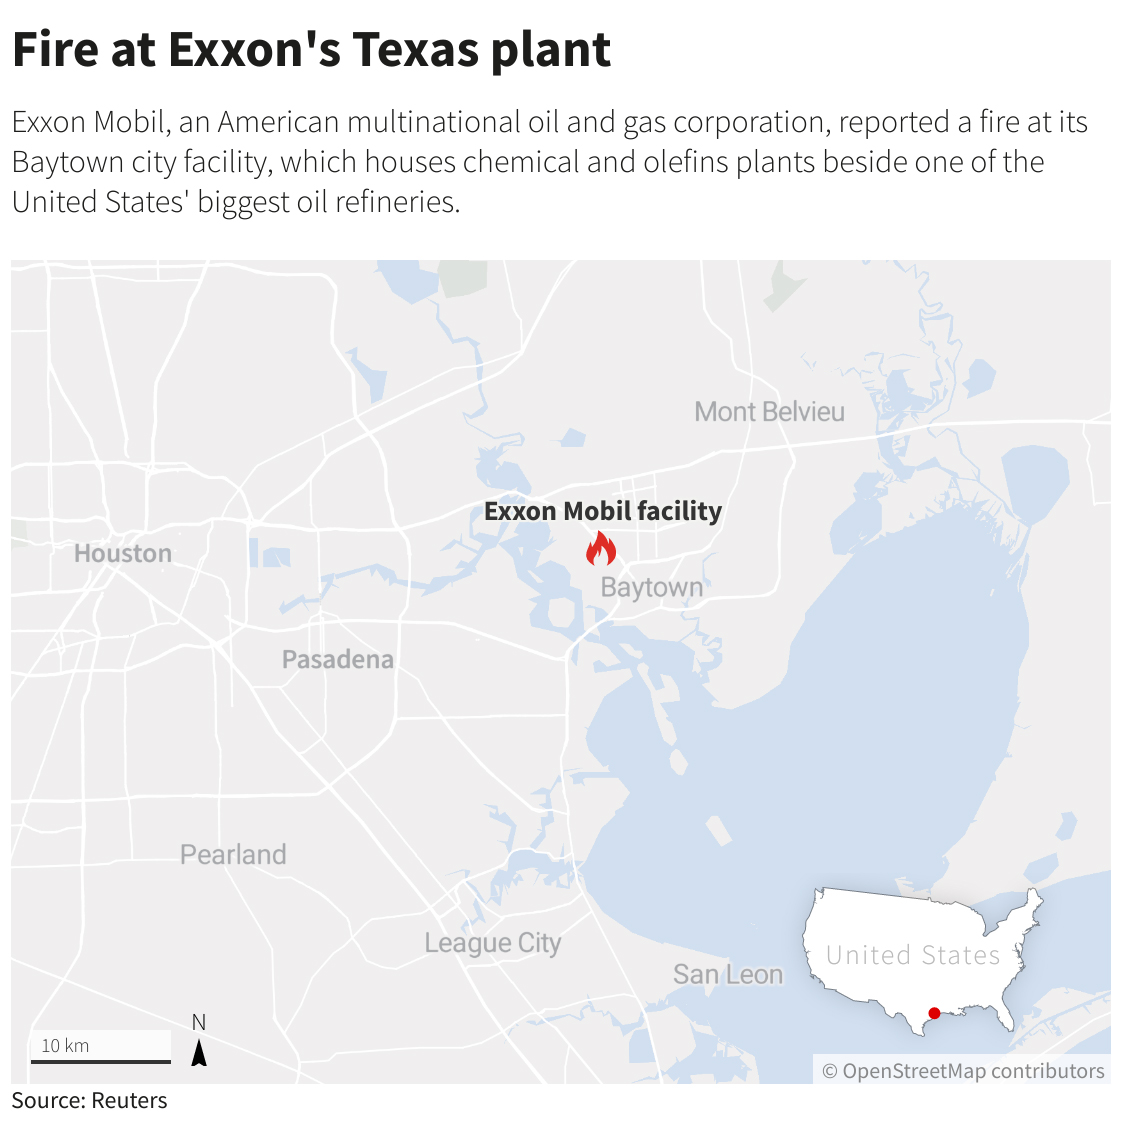 Four injured in fire at Exxon's Baytown, Texas plant